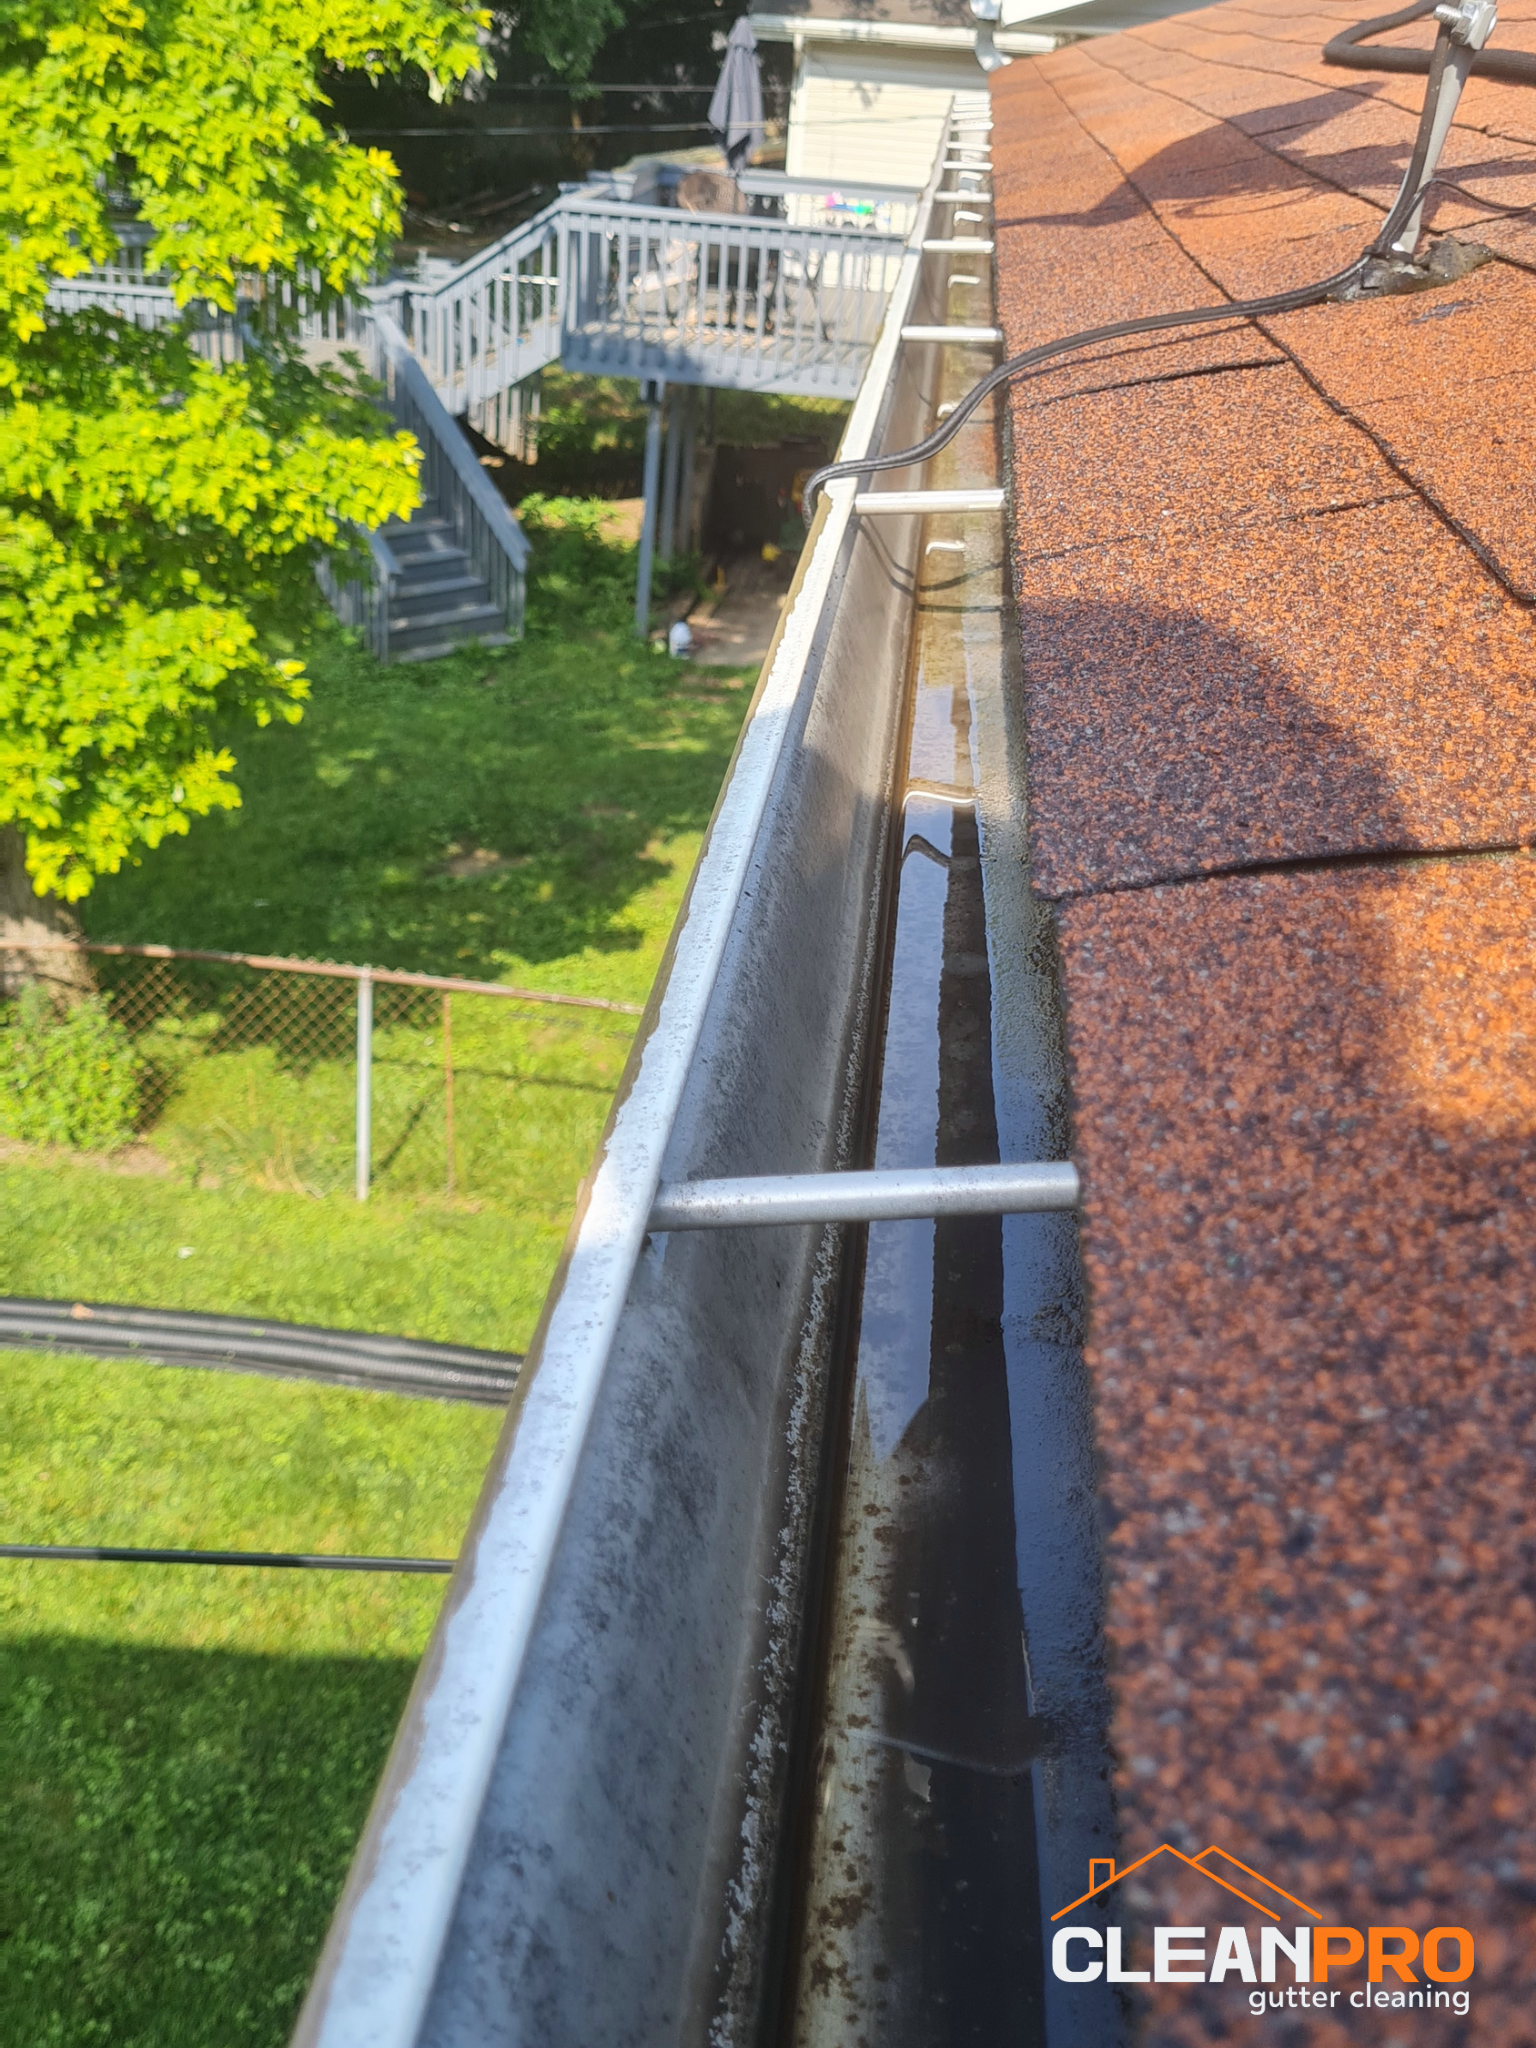 Quality Gutter Cleaning in Franklin TN